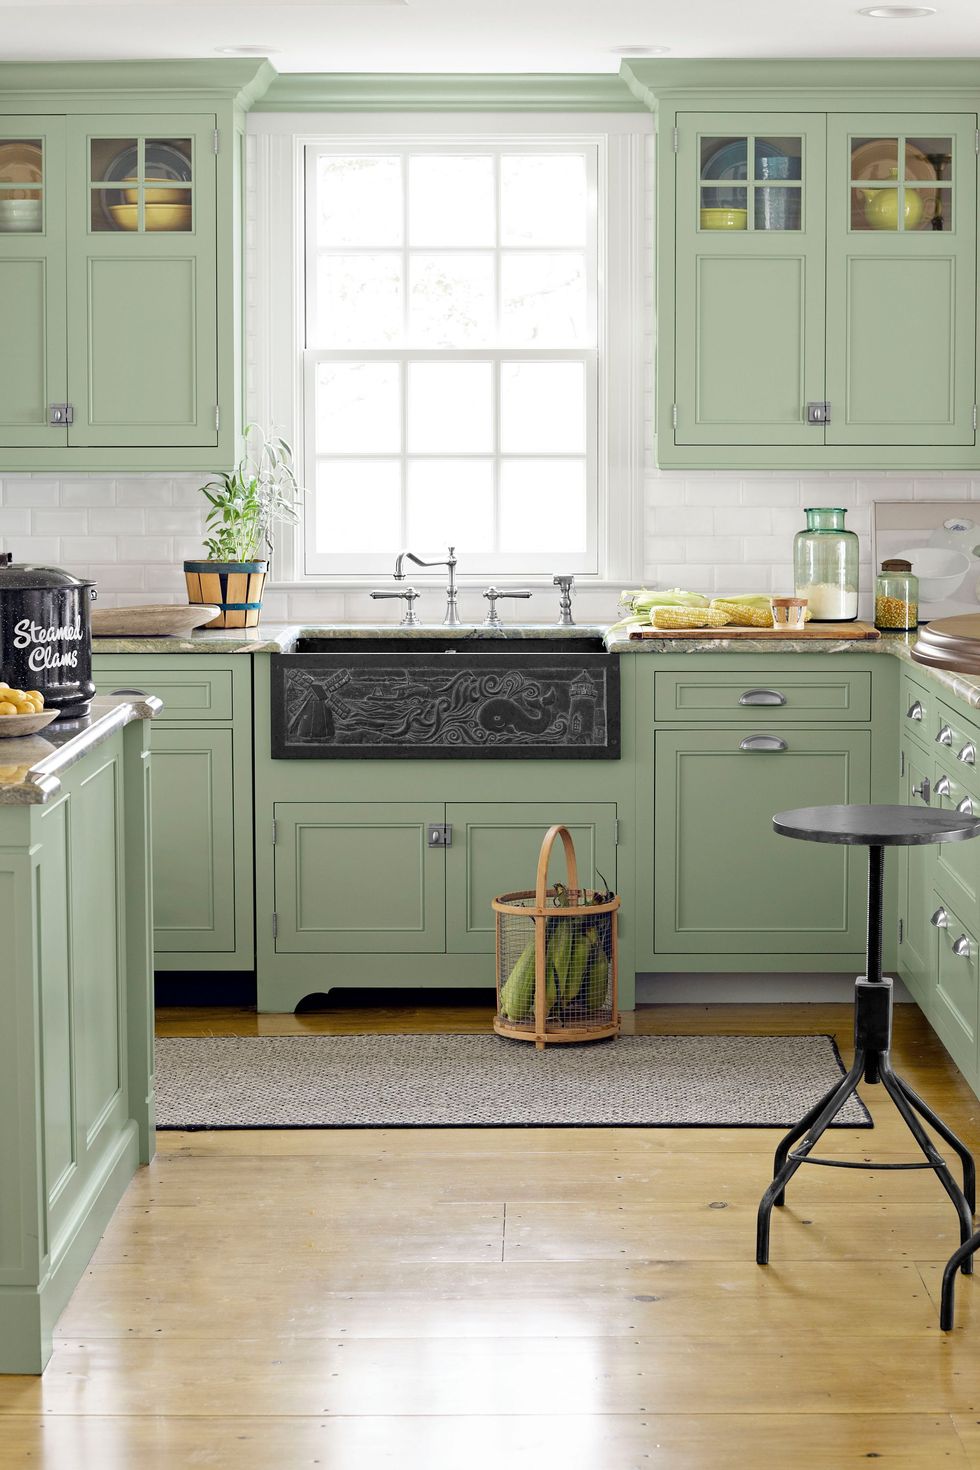 https://hips.hearstapps.com/hmg-prod/images/kitchen-paint-colors-celadon-green-cabinets-1648049722.jpg?crop=1xw:1xh;center,top&resize=980:*